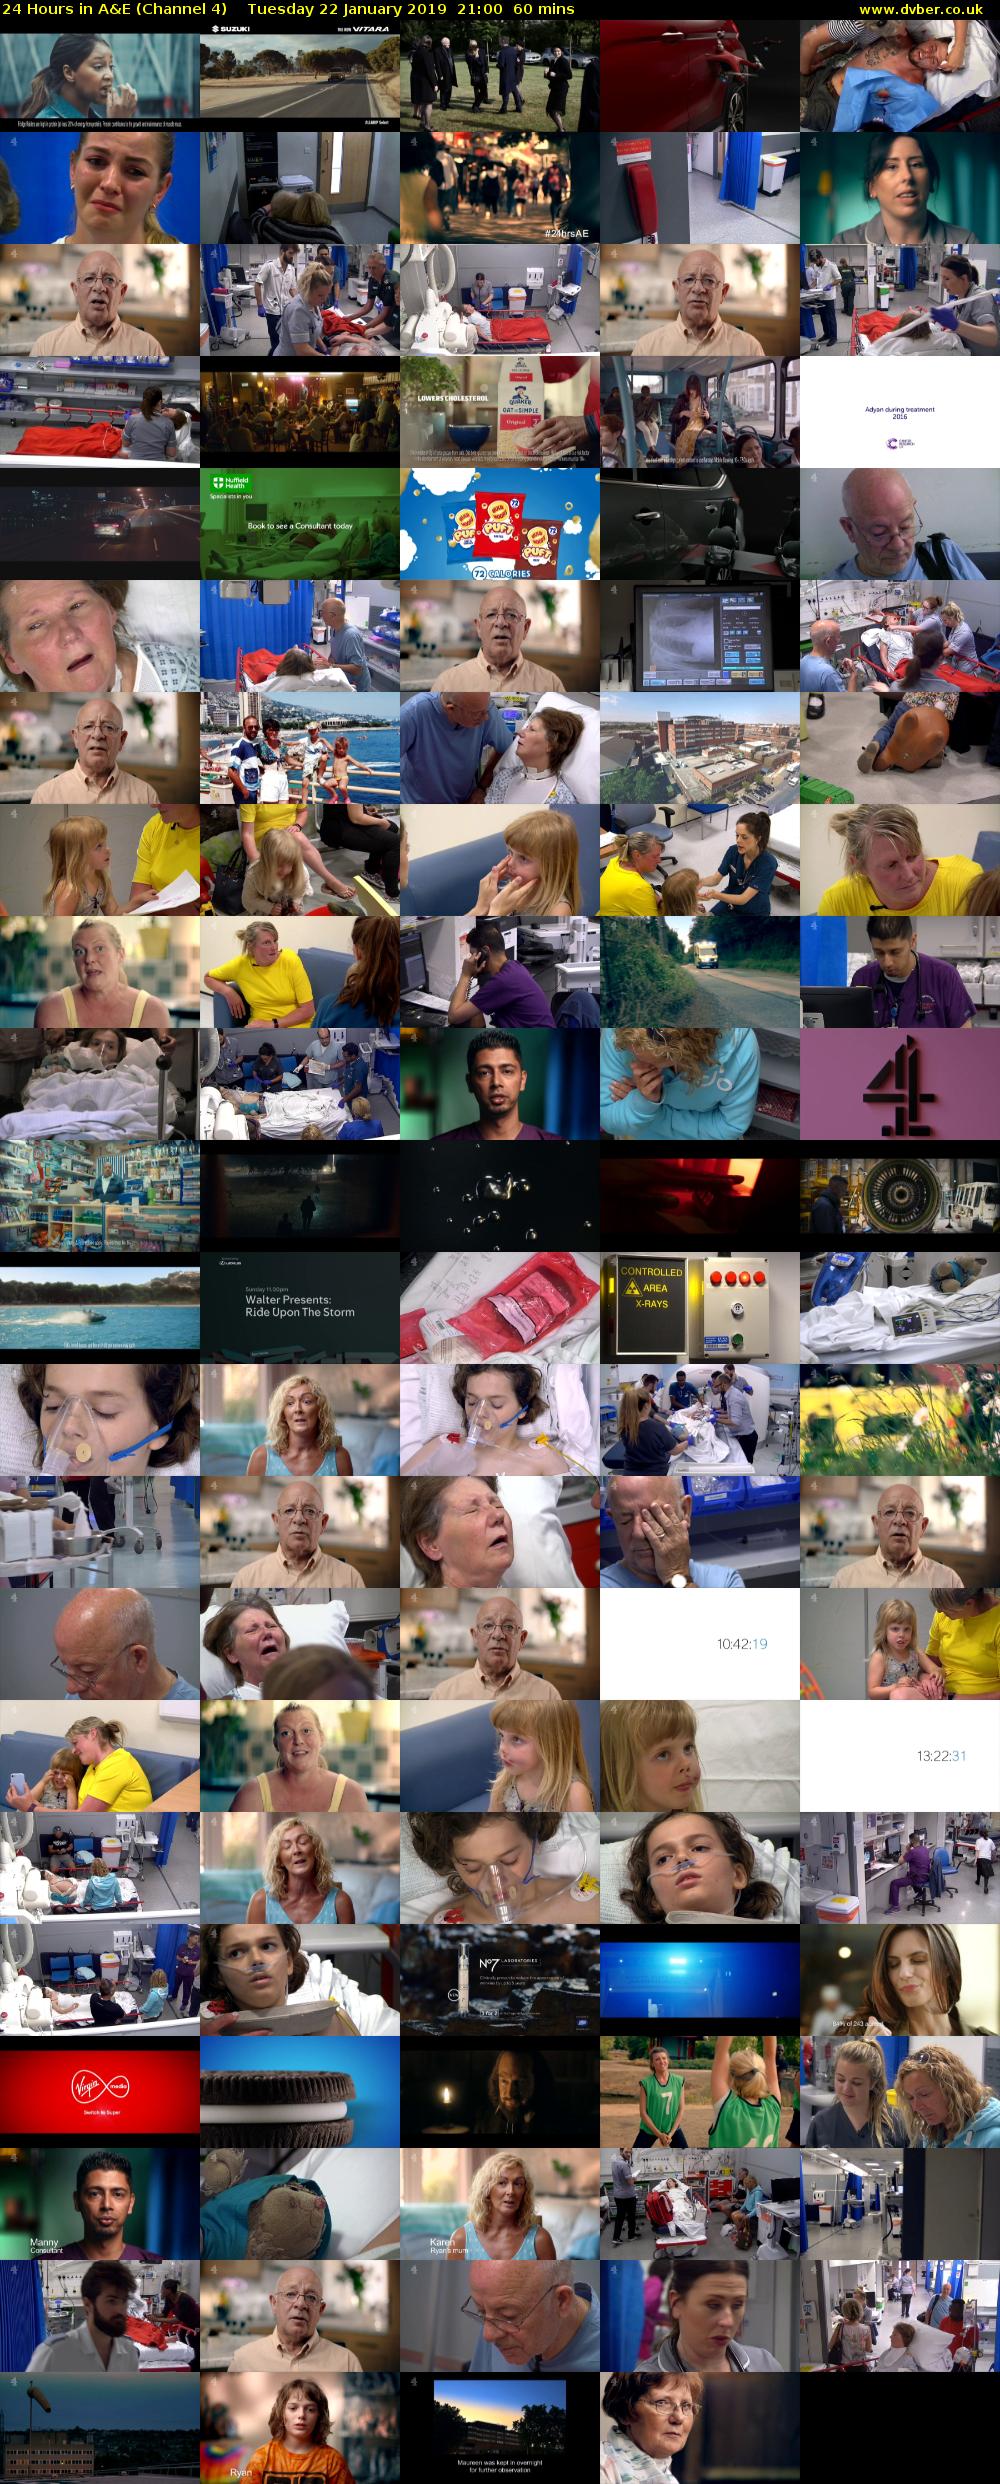 24 Hours in A&E (Channel 4) Tuesday 22 January 2019 21:00 - 22:00